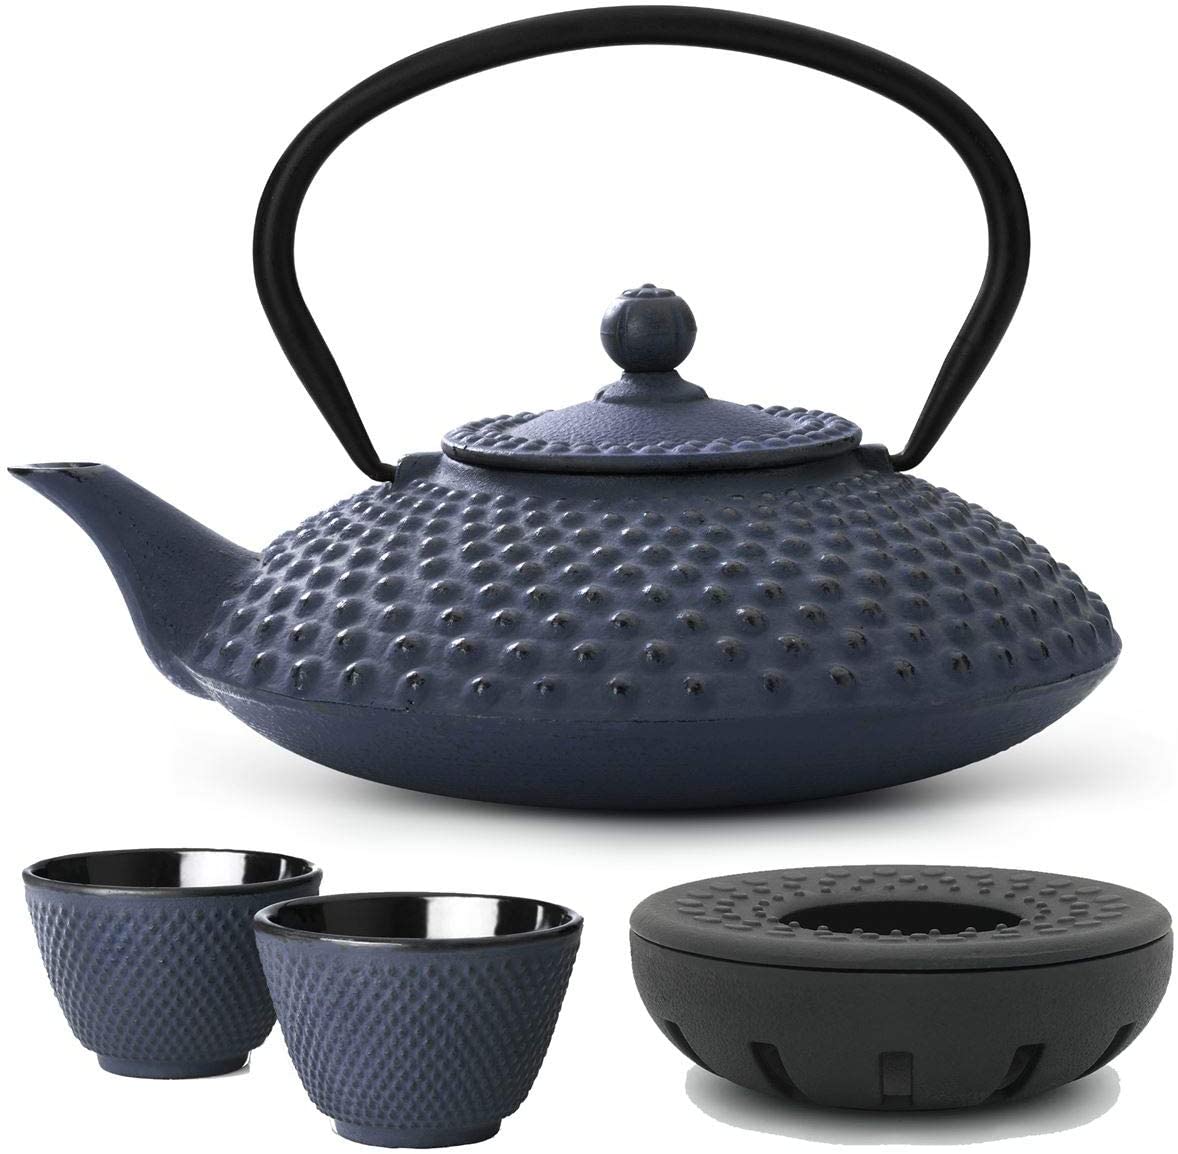 Bredemeijer Teapot Asian Cast Iron Set Blue 1.25 Litres with Tea Filter Strainer and Warmer Including Tea Cup